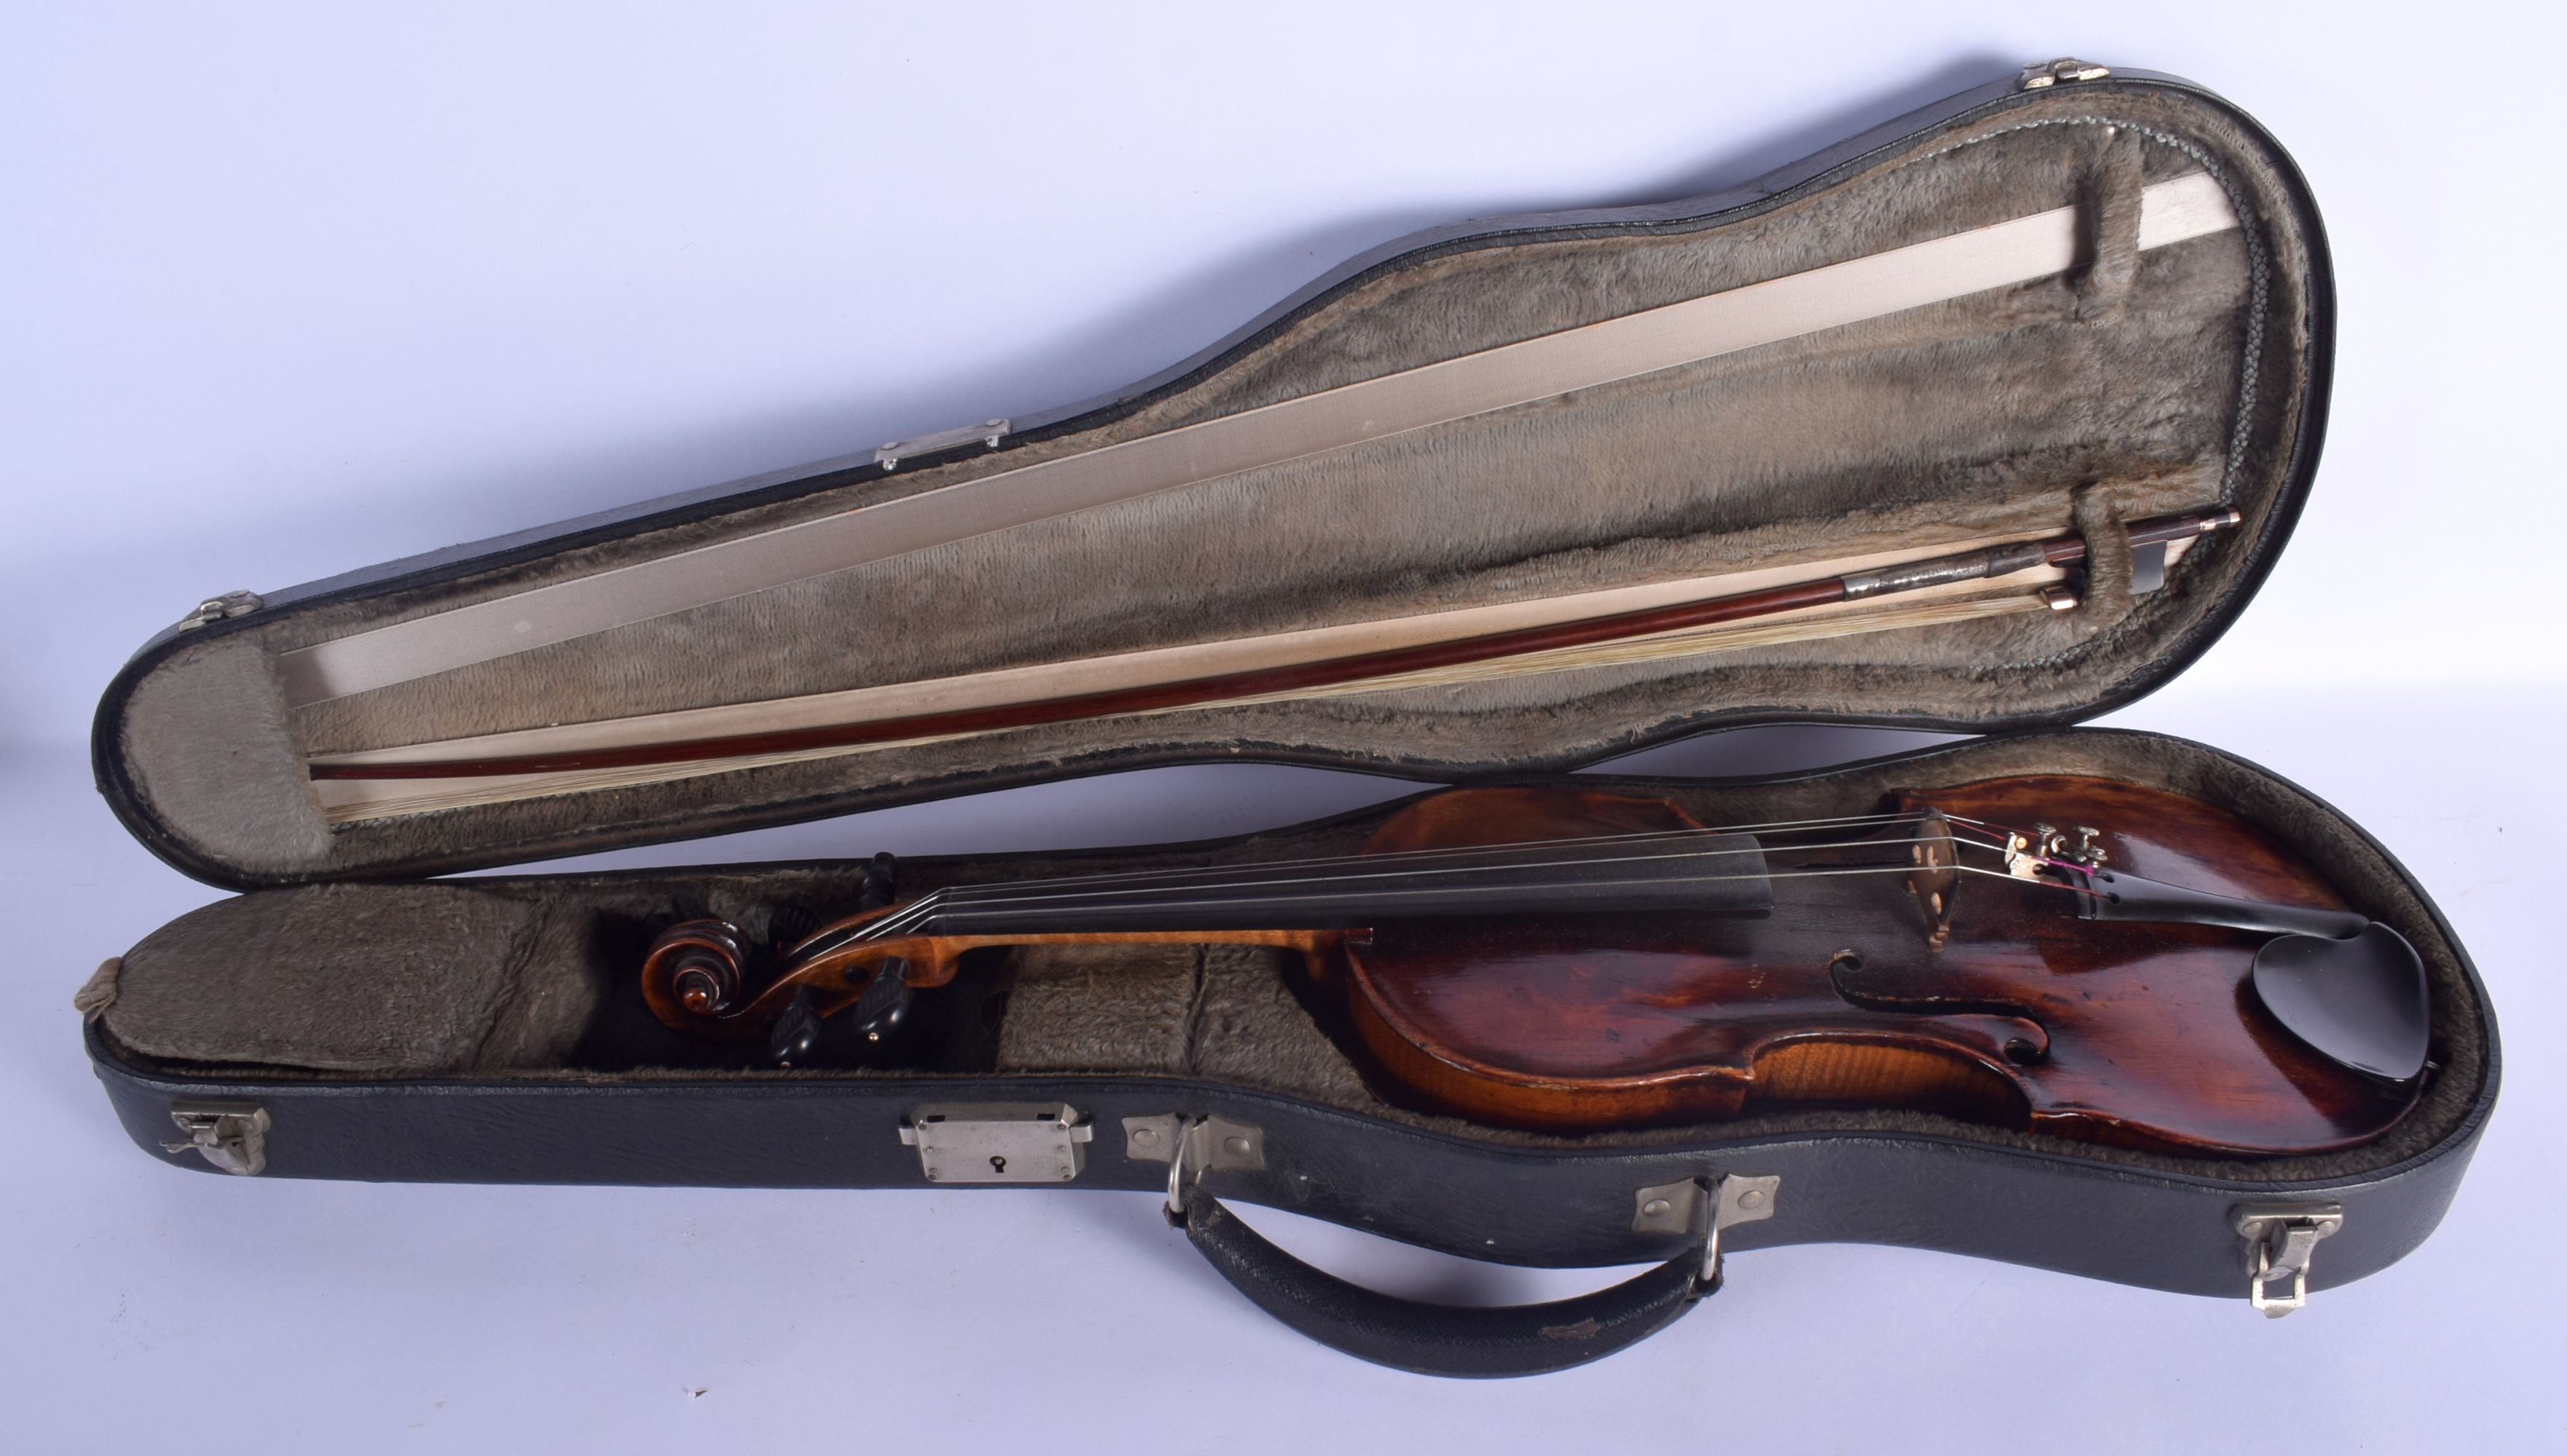 A CASED 18TH CENTURY SINGLE PIECE BACK VIOLIN by Charles & Samuel Thompson C1780, together with a go